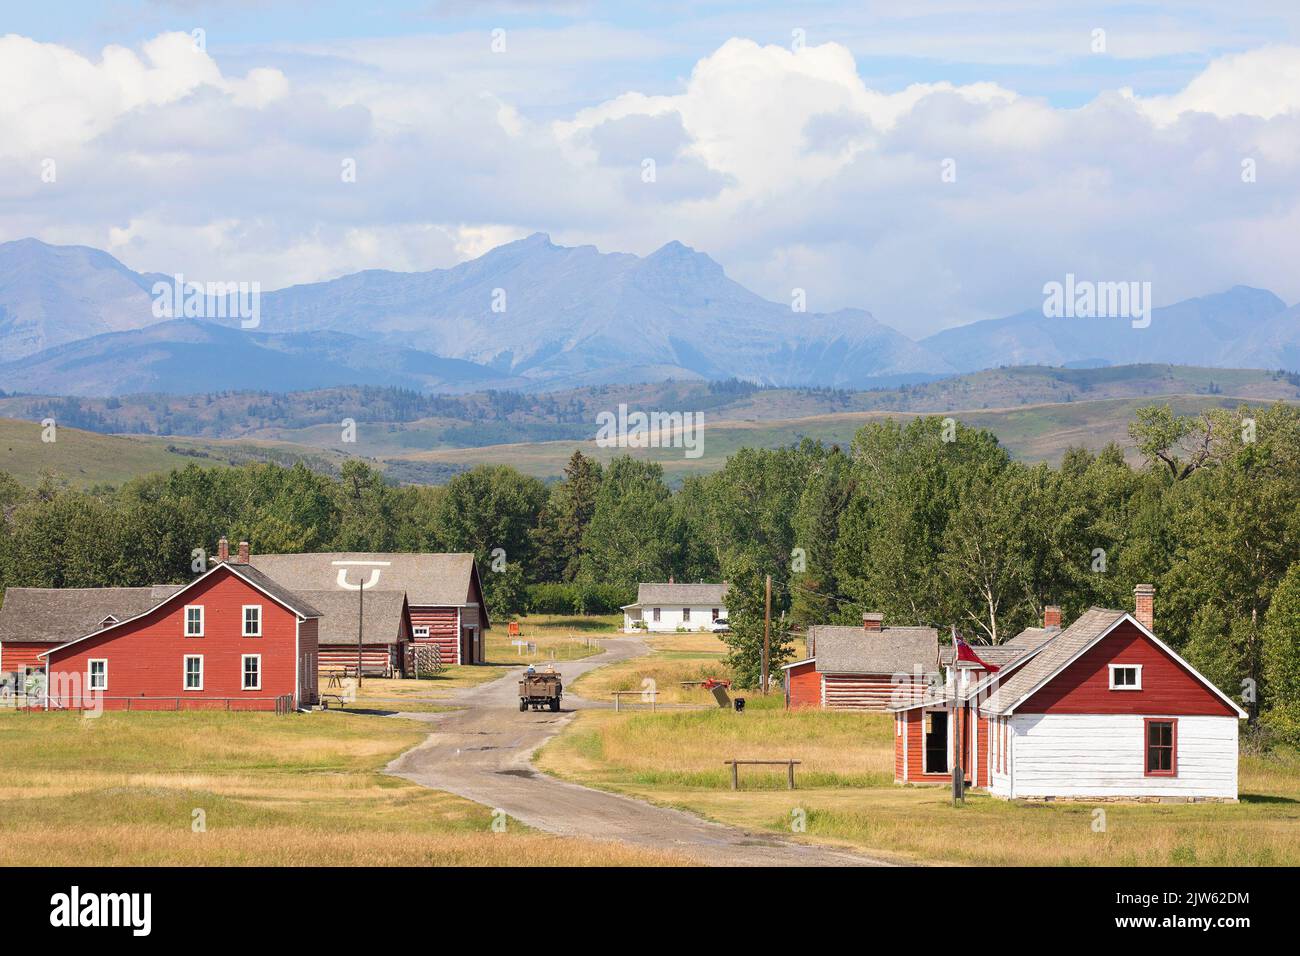 Bar U Ranch National Historic Site in the Rocky Mountain foothills of Alberta has the largest collection of historical ranch buildings in Canada Stock Photo